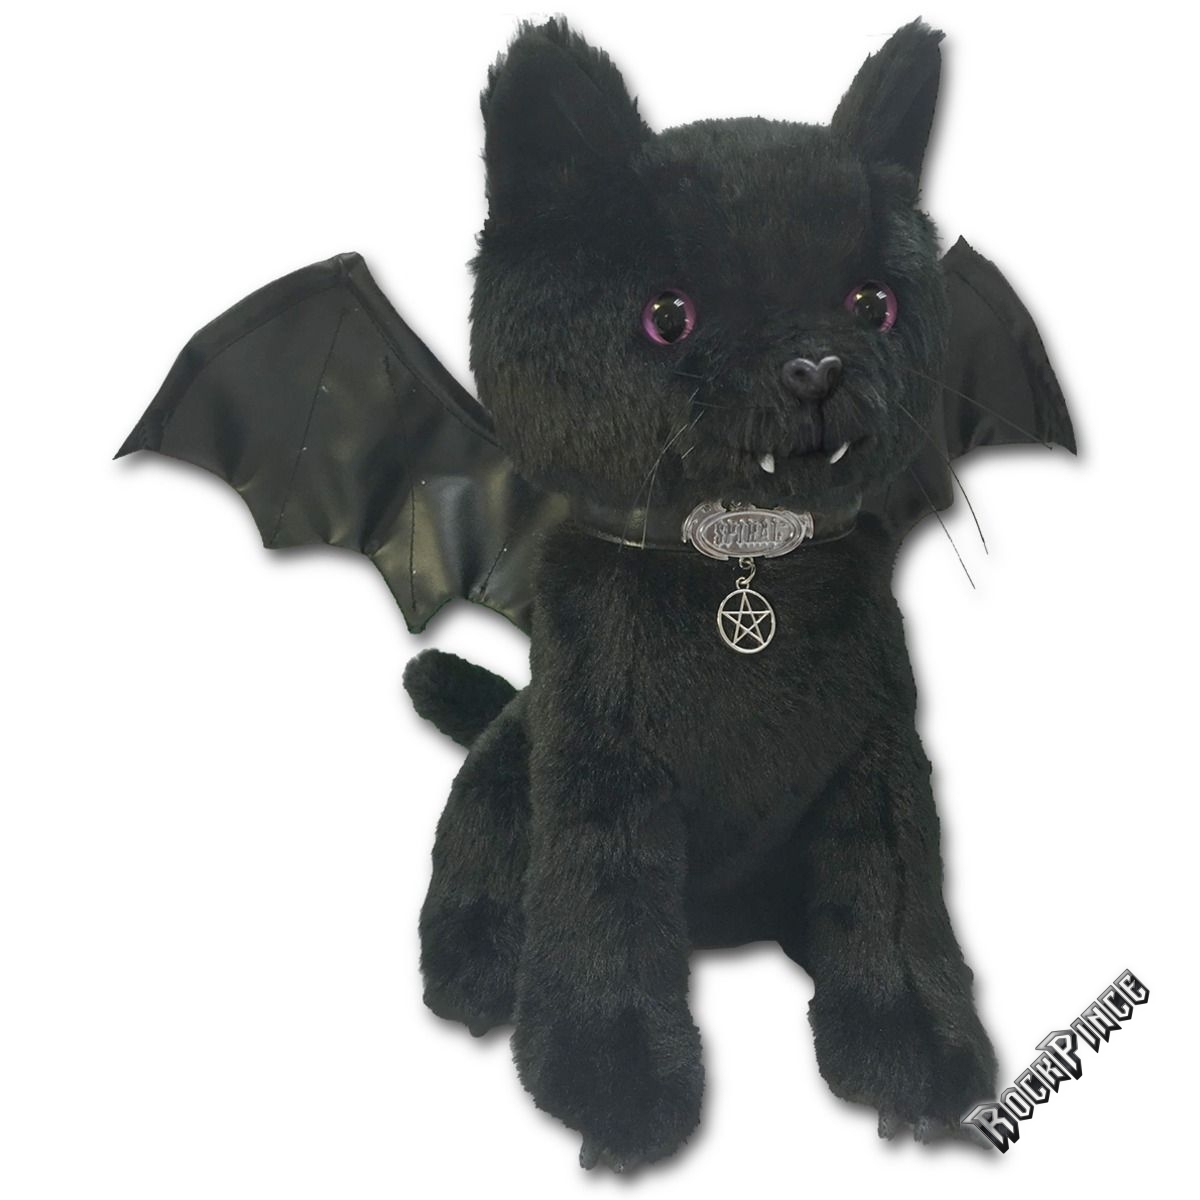 BAT CAT - Winged Collectable Soft Plush Toy 12 inch - F015A853